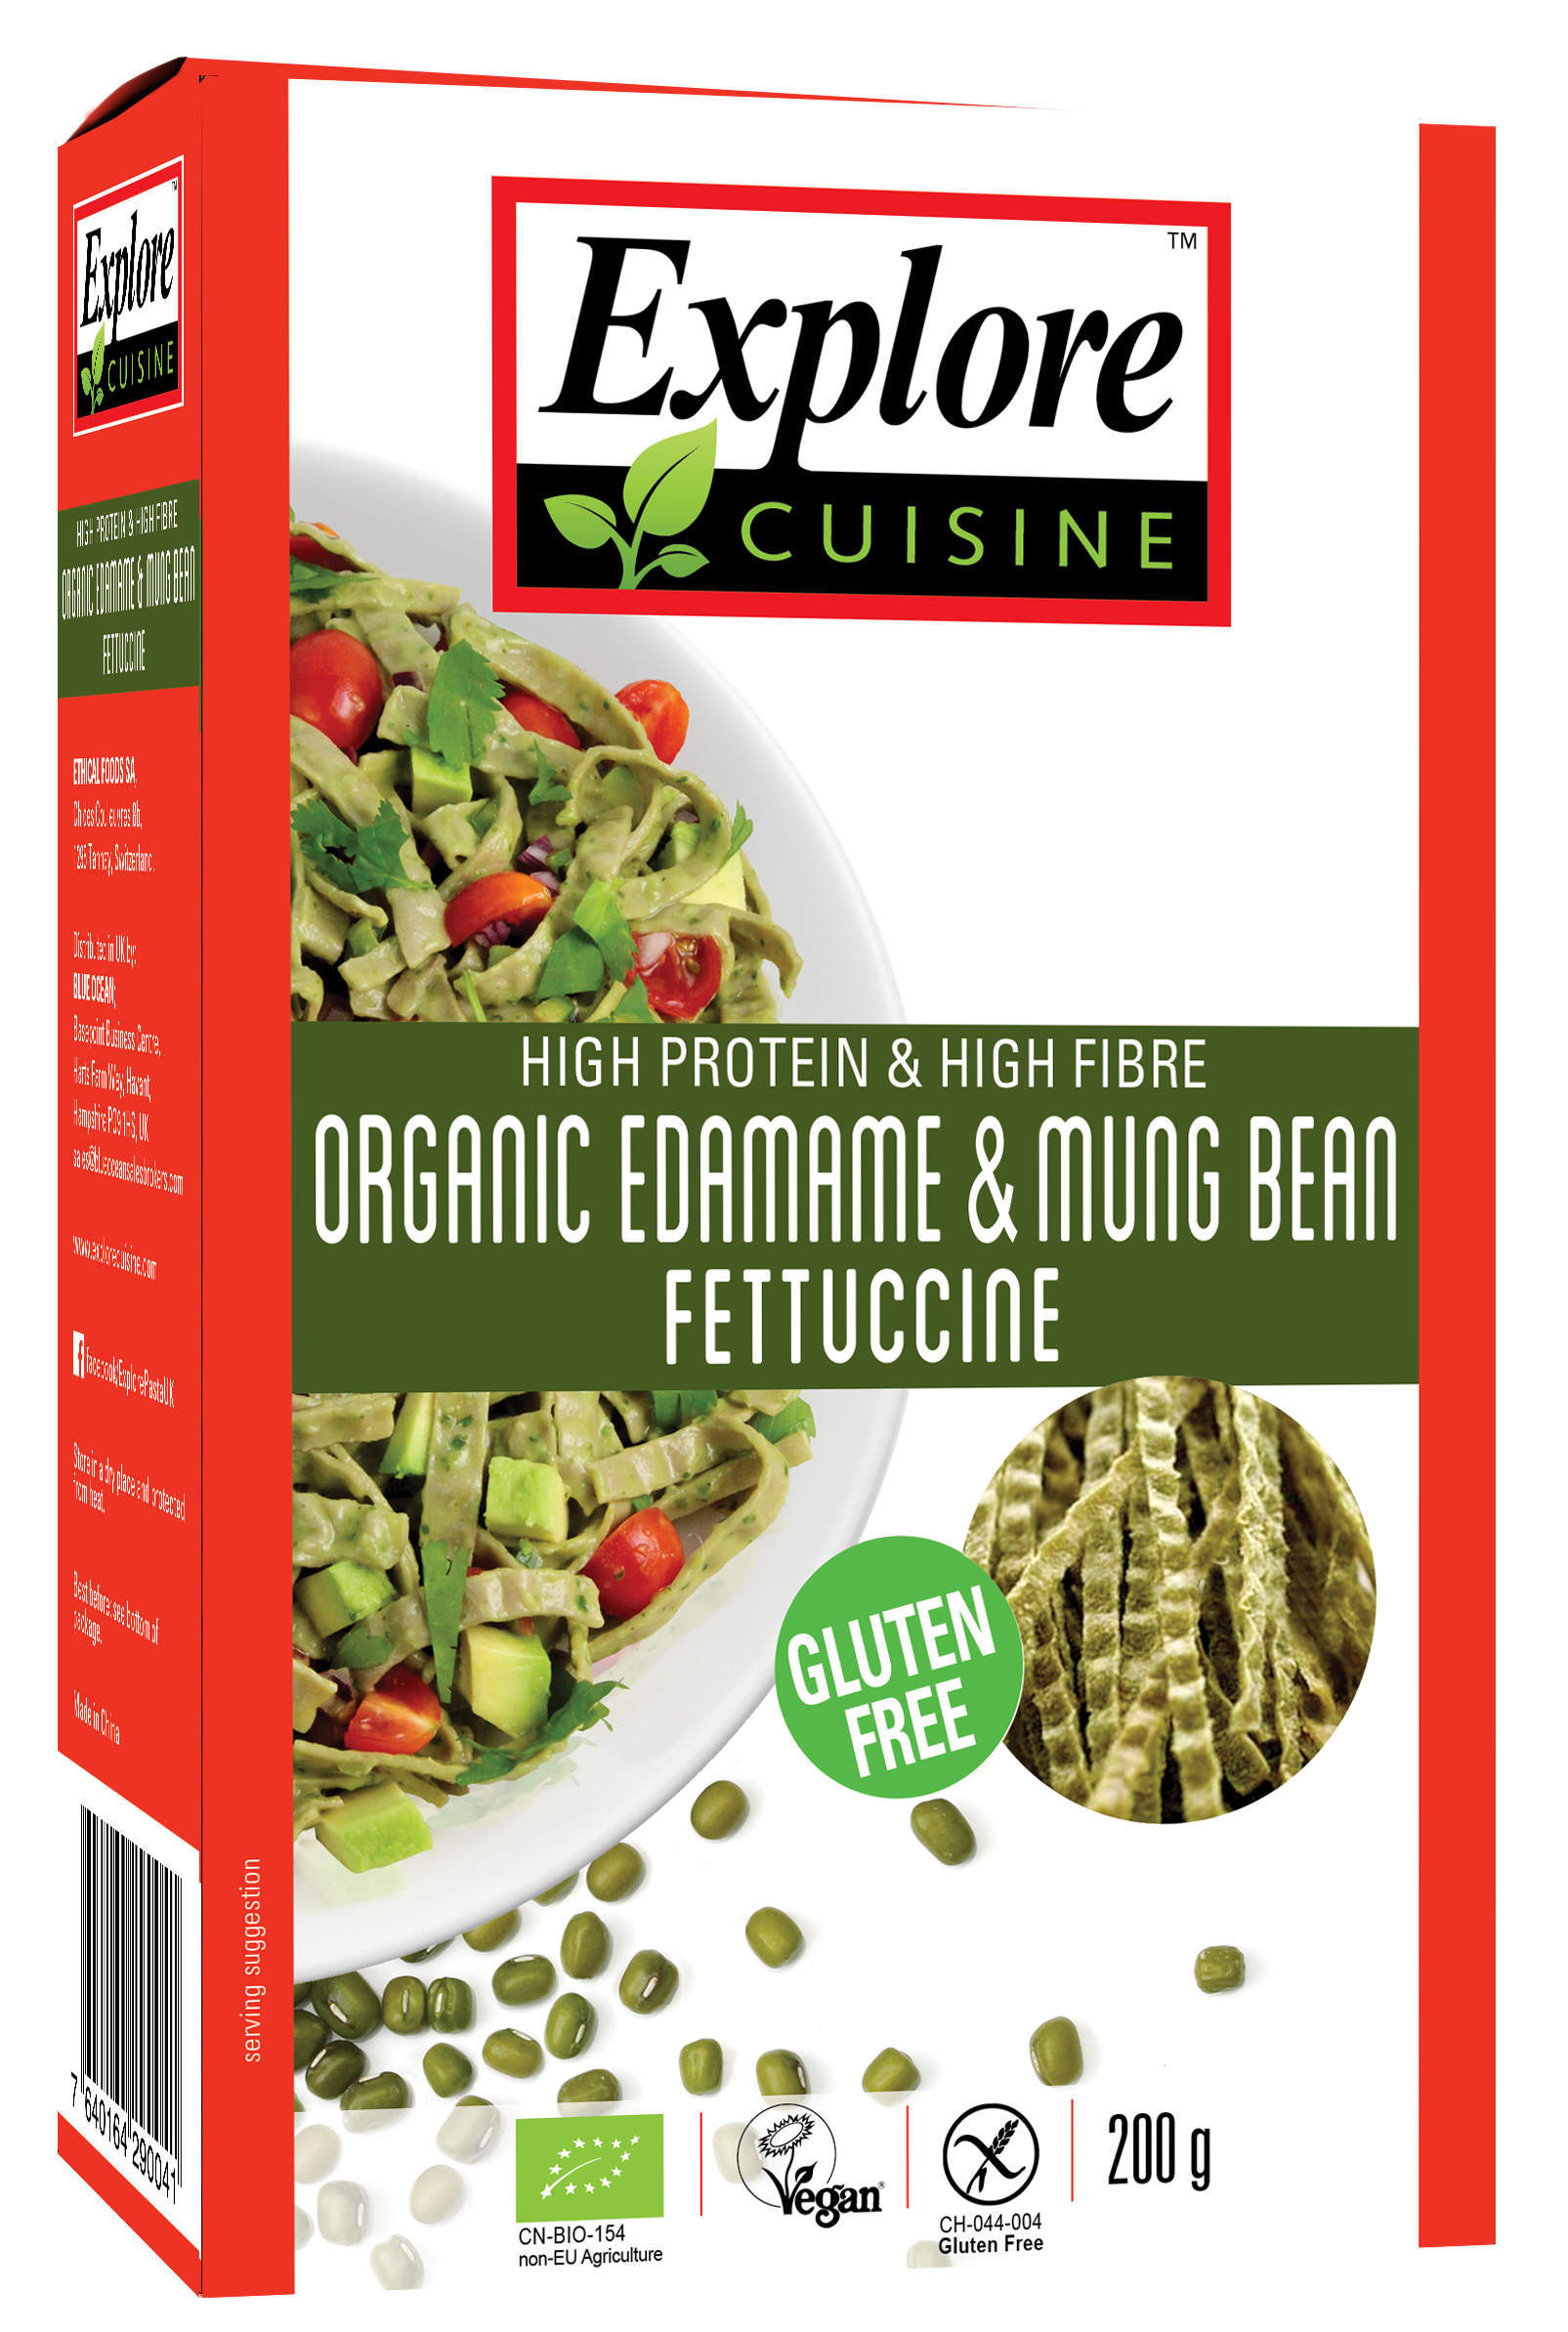 Explore Cuisine aims to expand horizons with new packaging launch